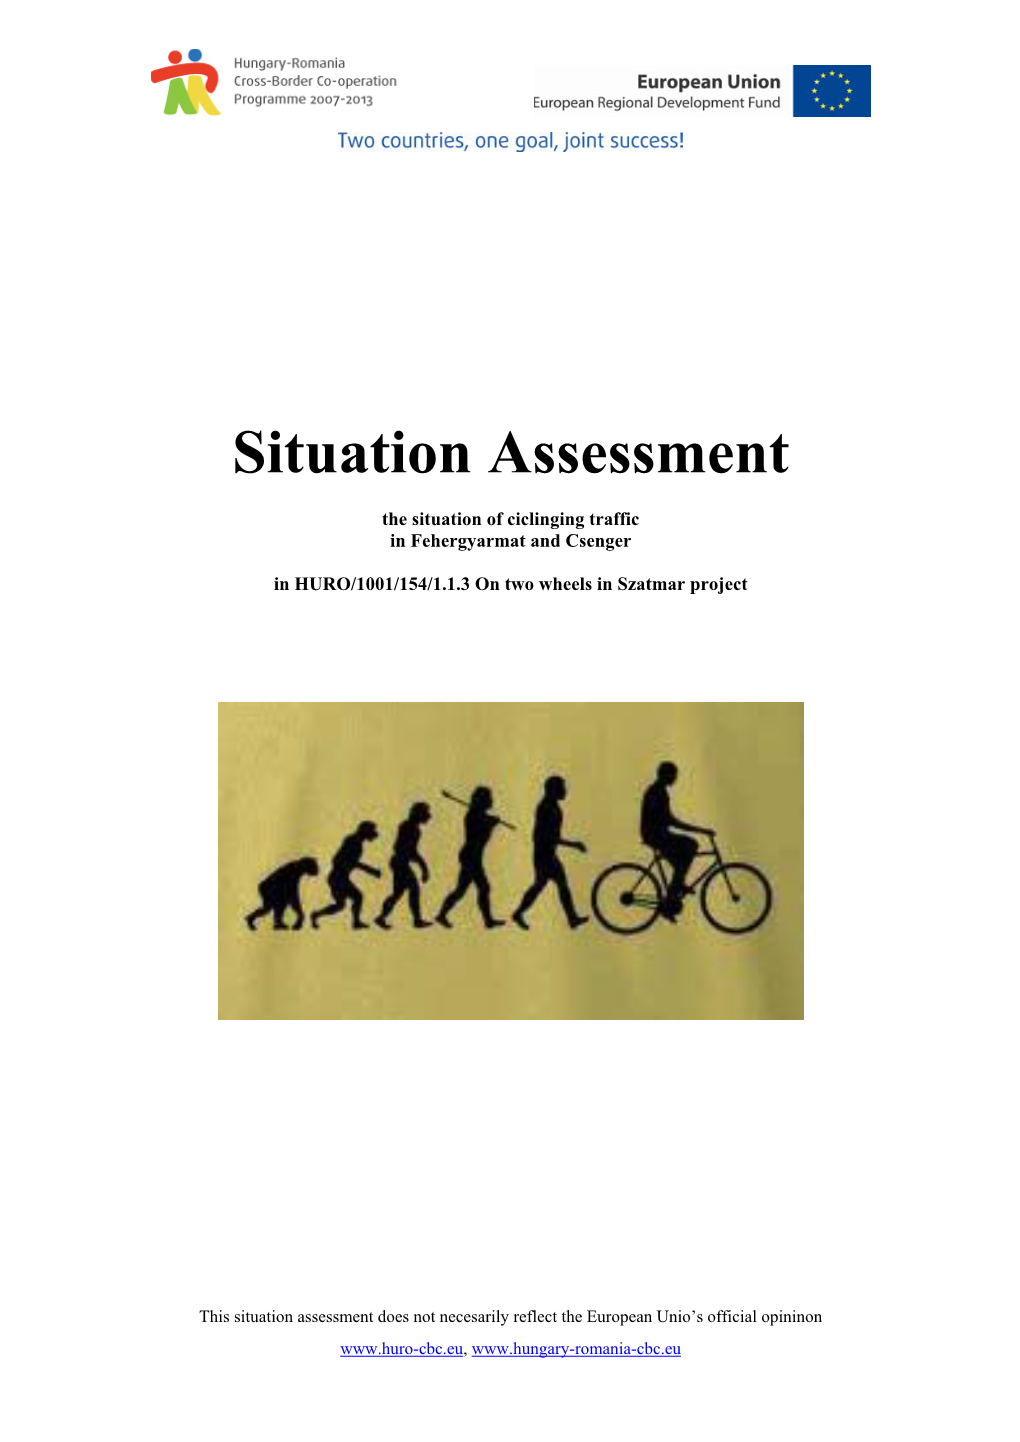 Situation Assessment